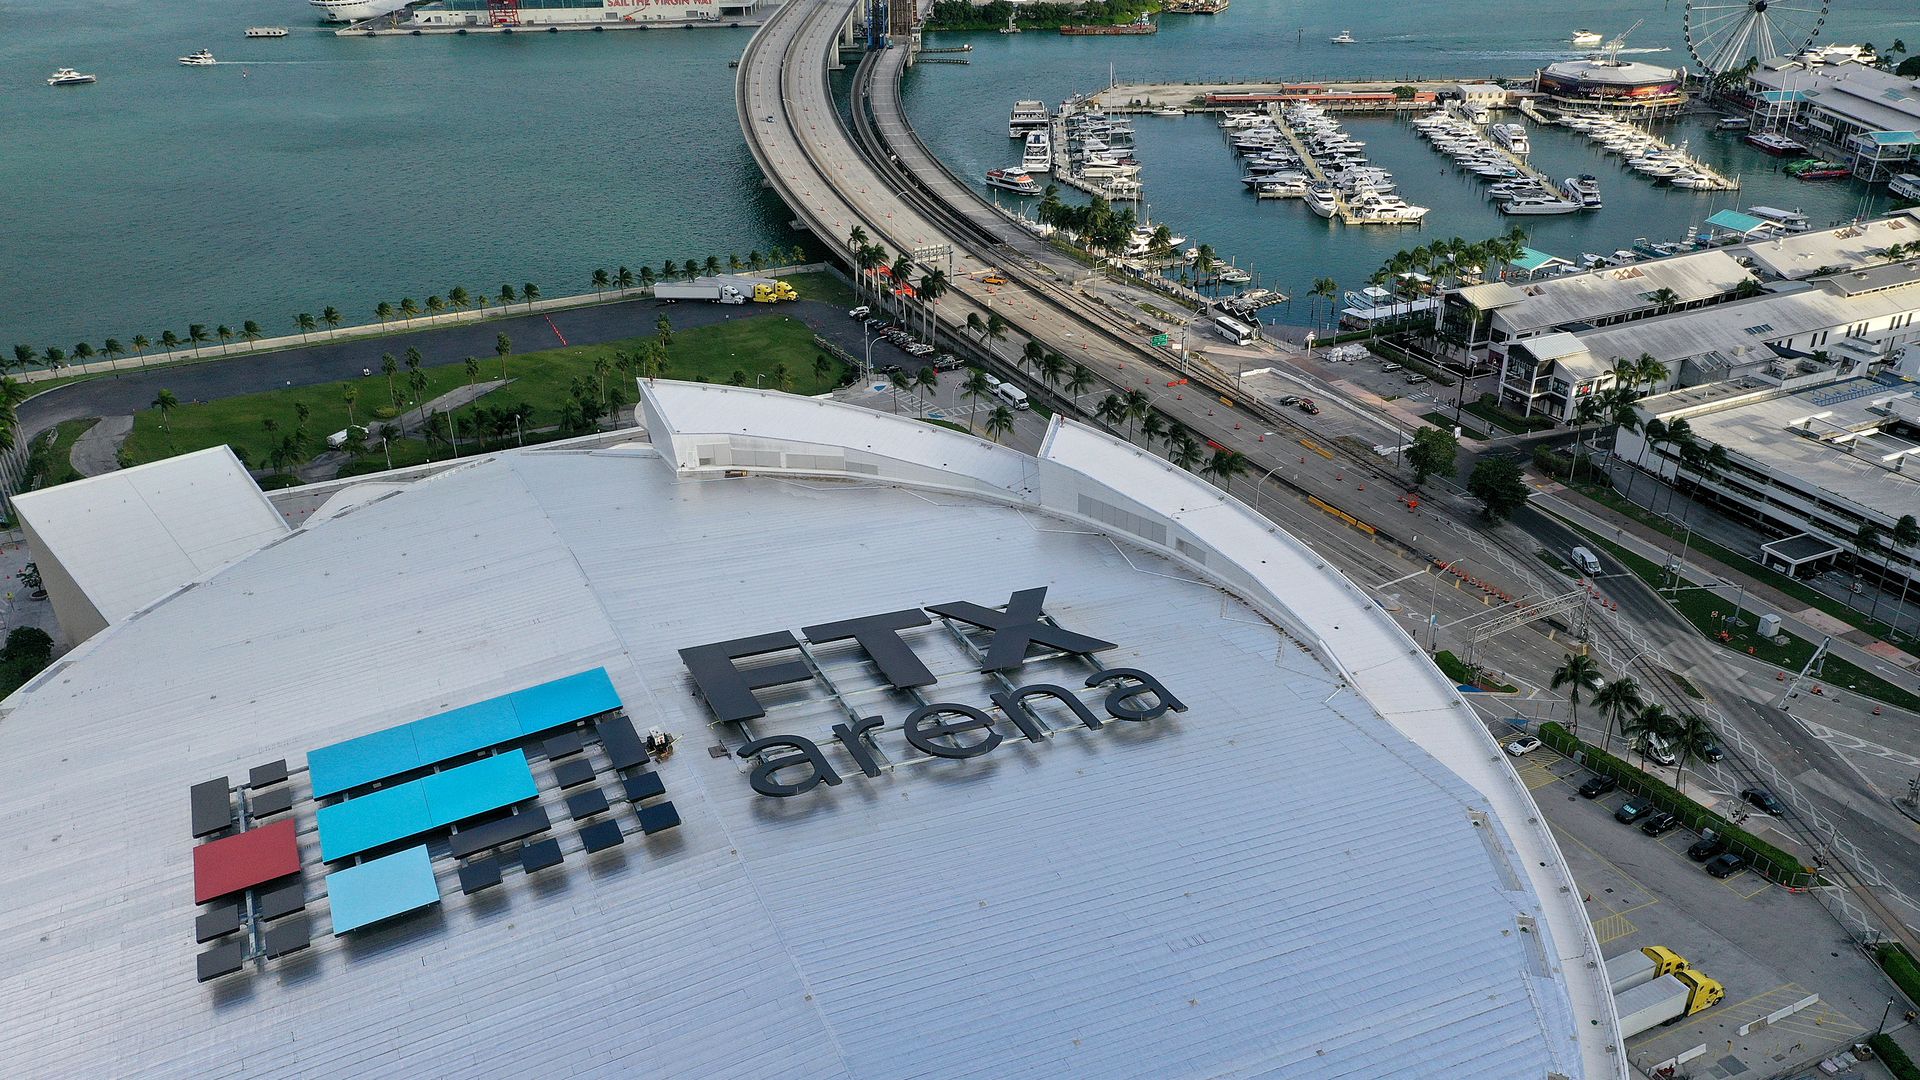 ftx arena from above